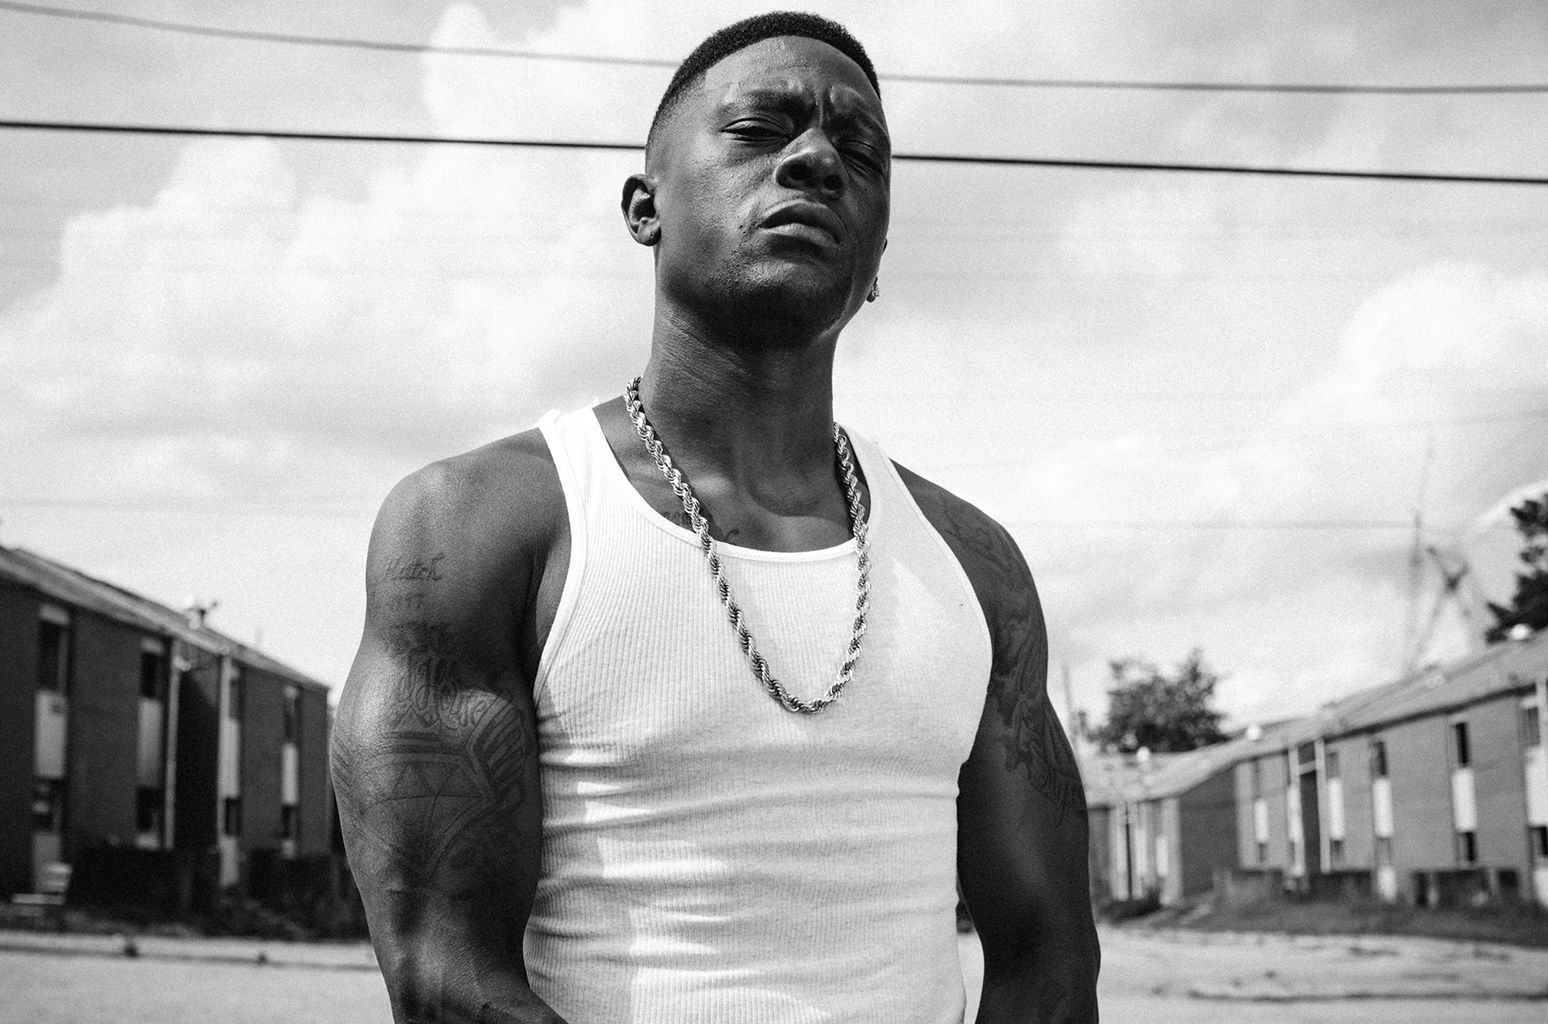 lil boosie songs from when he was called lil boosie